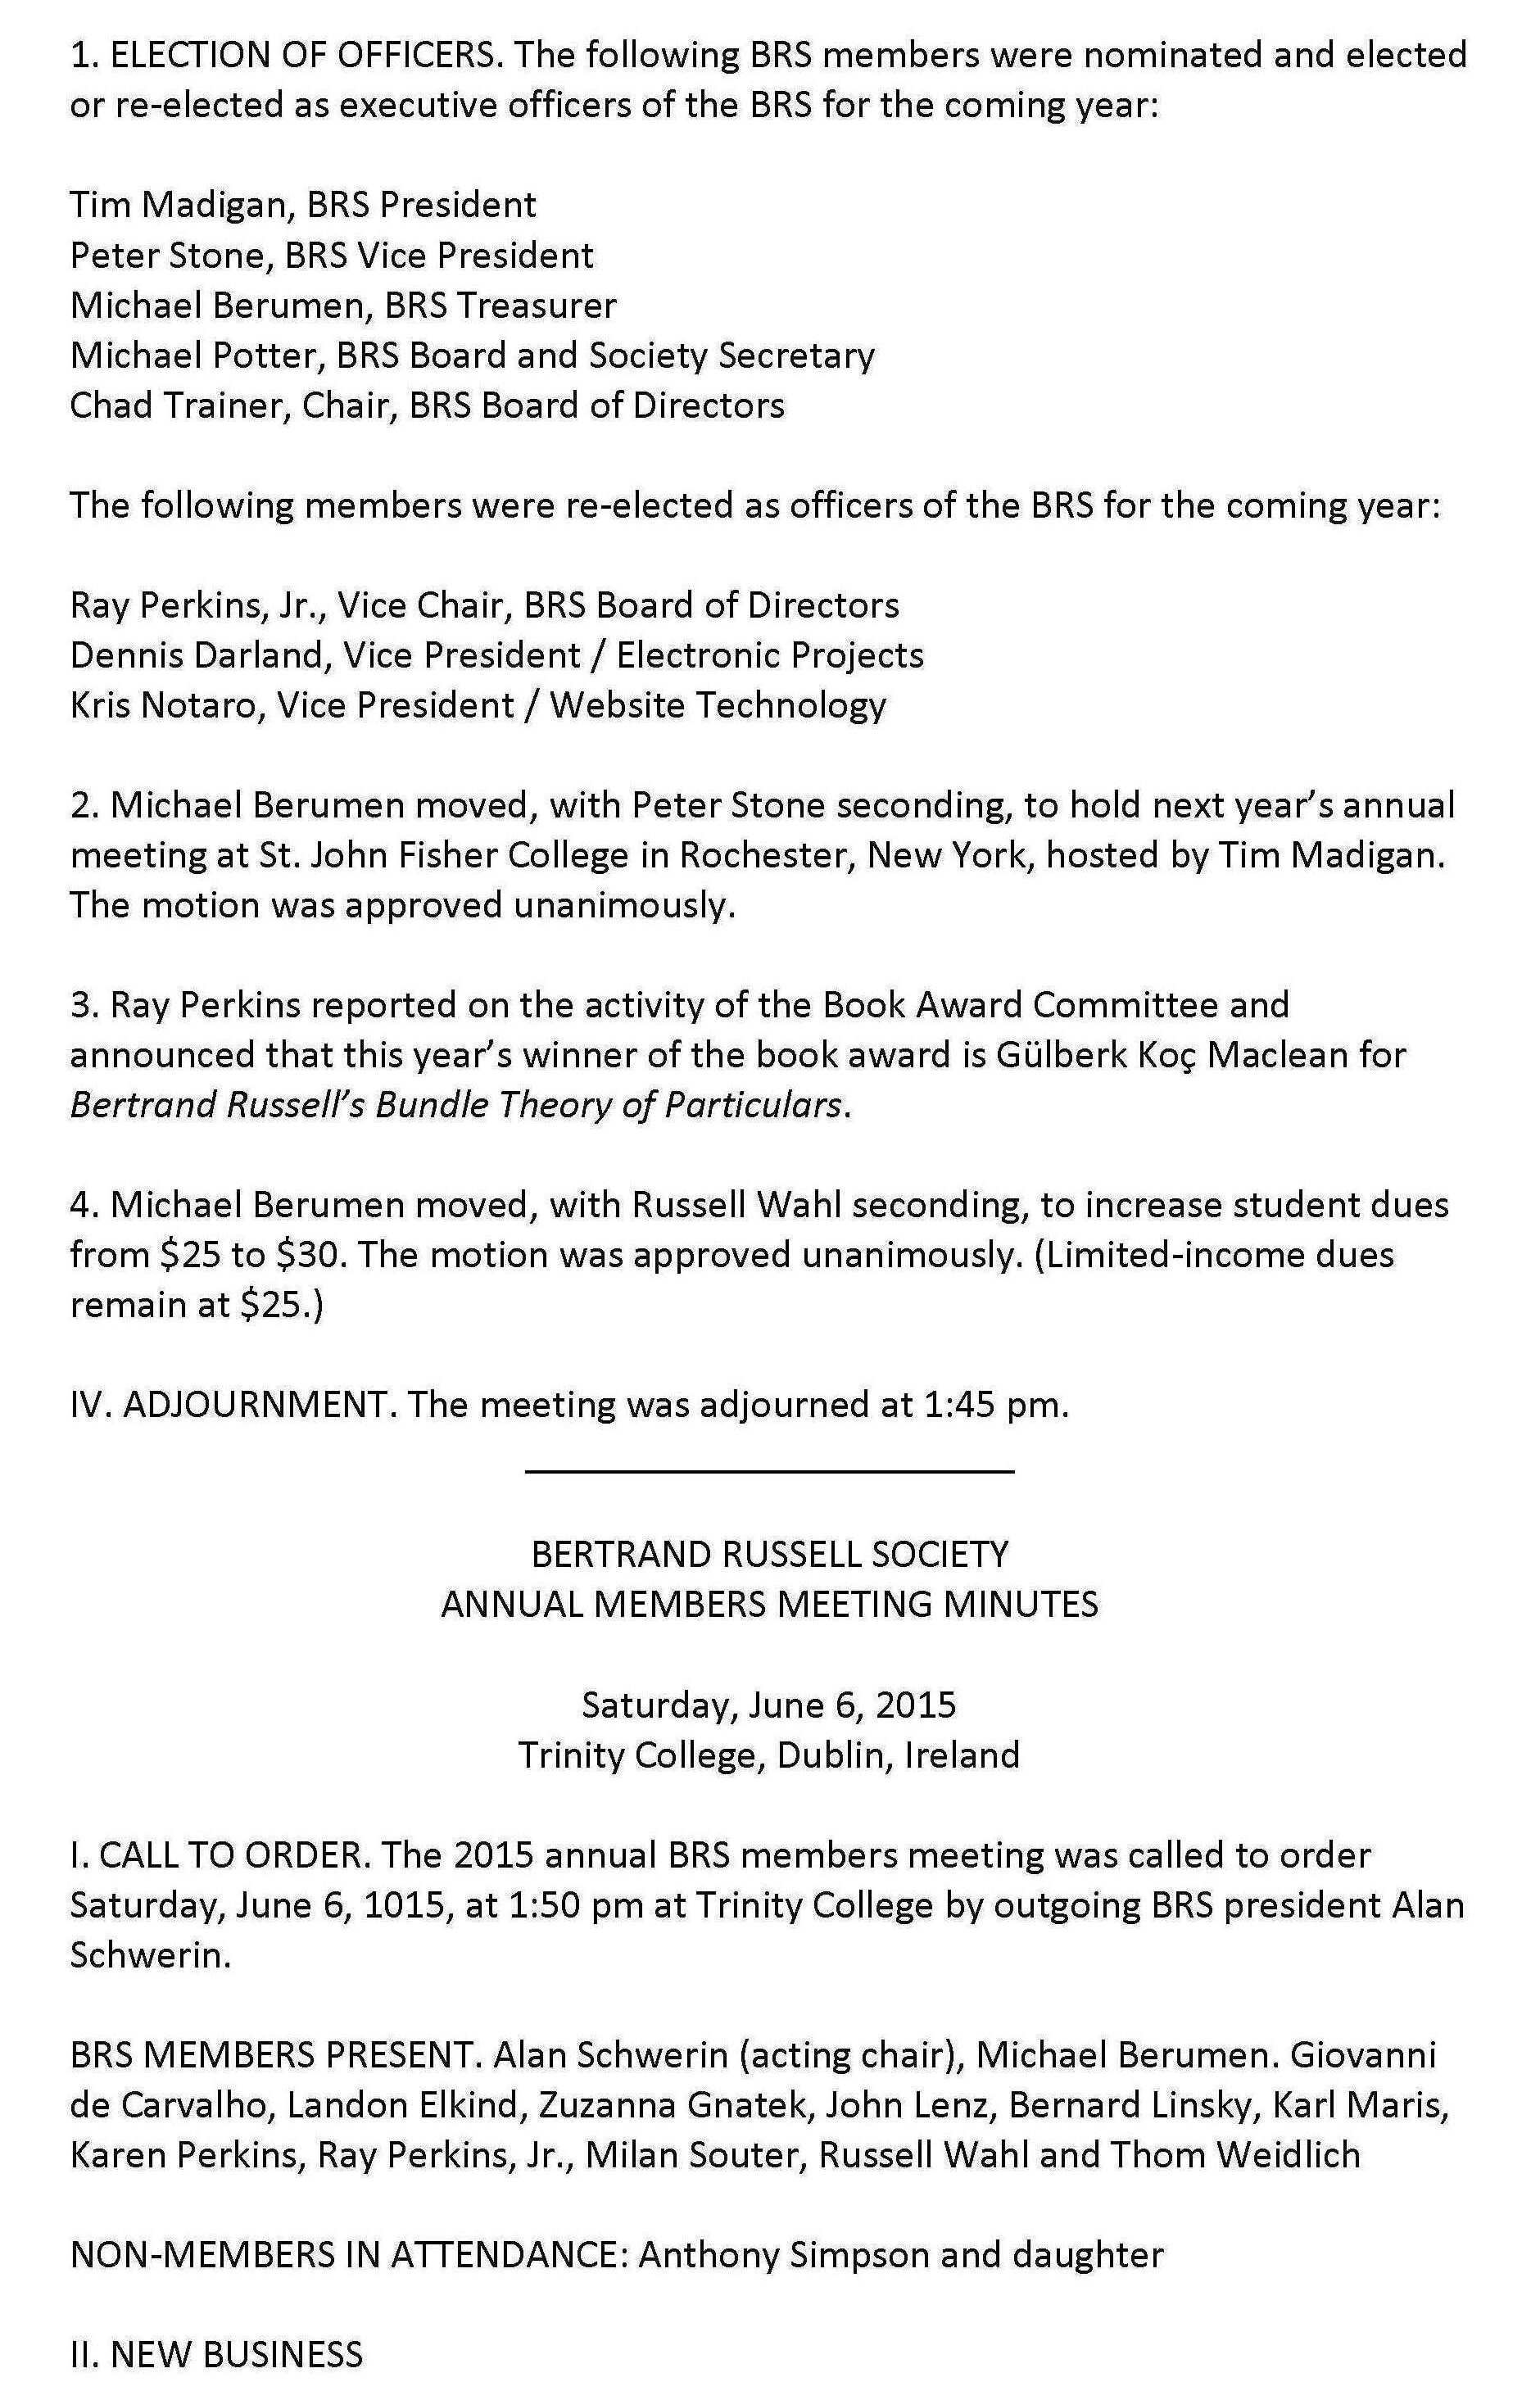 BRS Annual Meeting Minutes